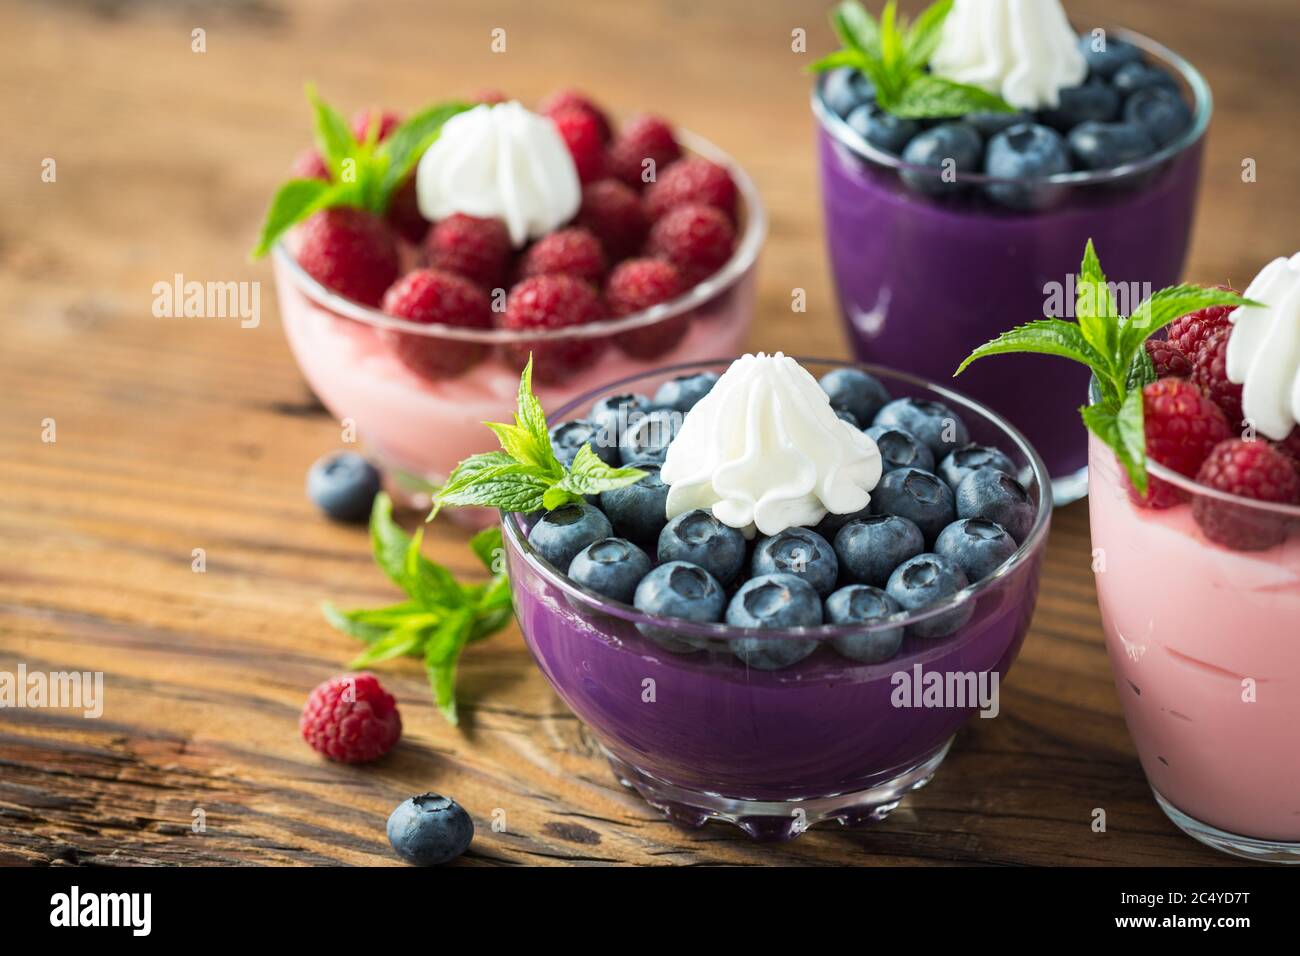 Berry fruit dessert in the glass bowl Stock Photo